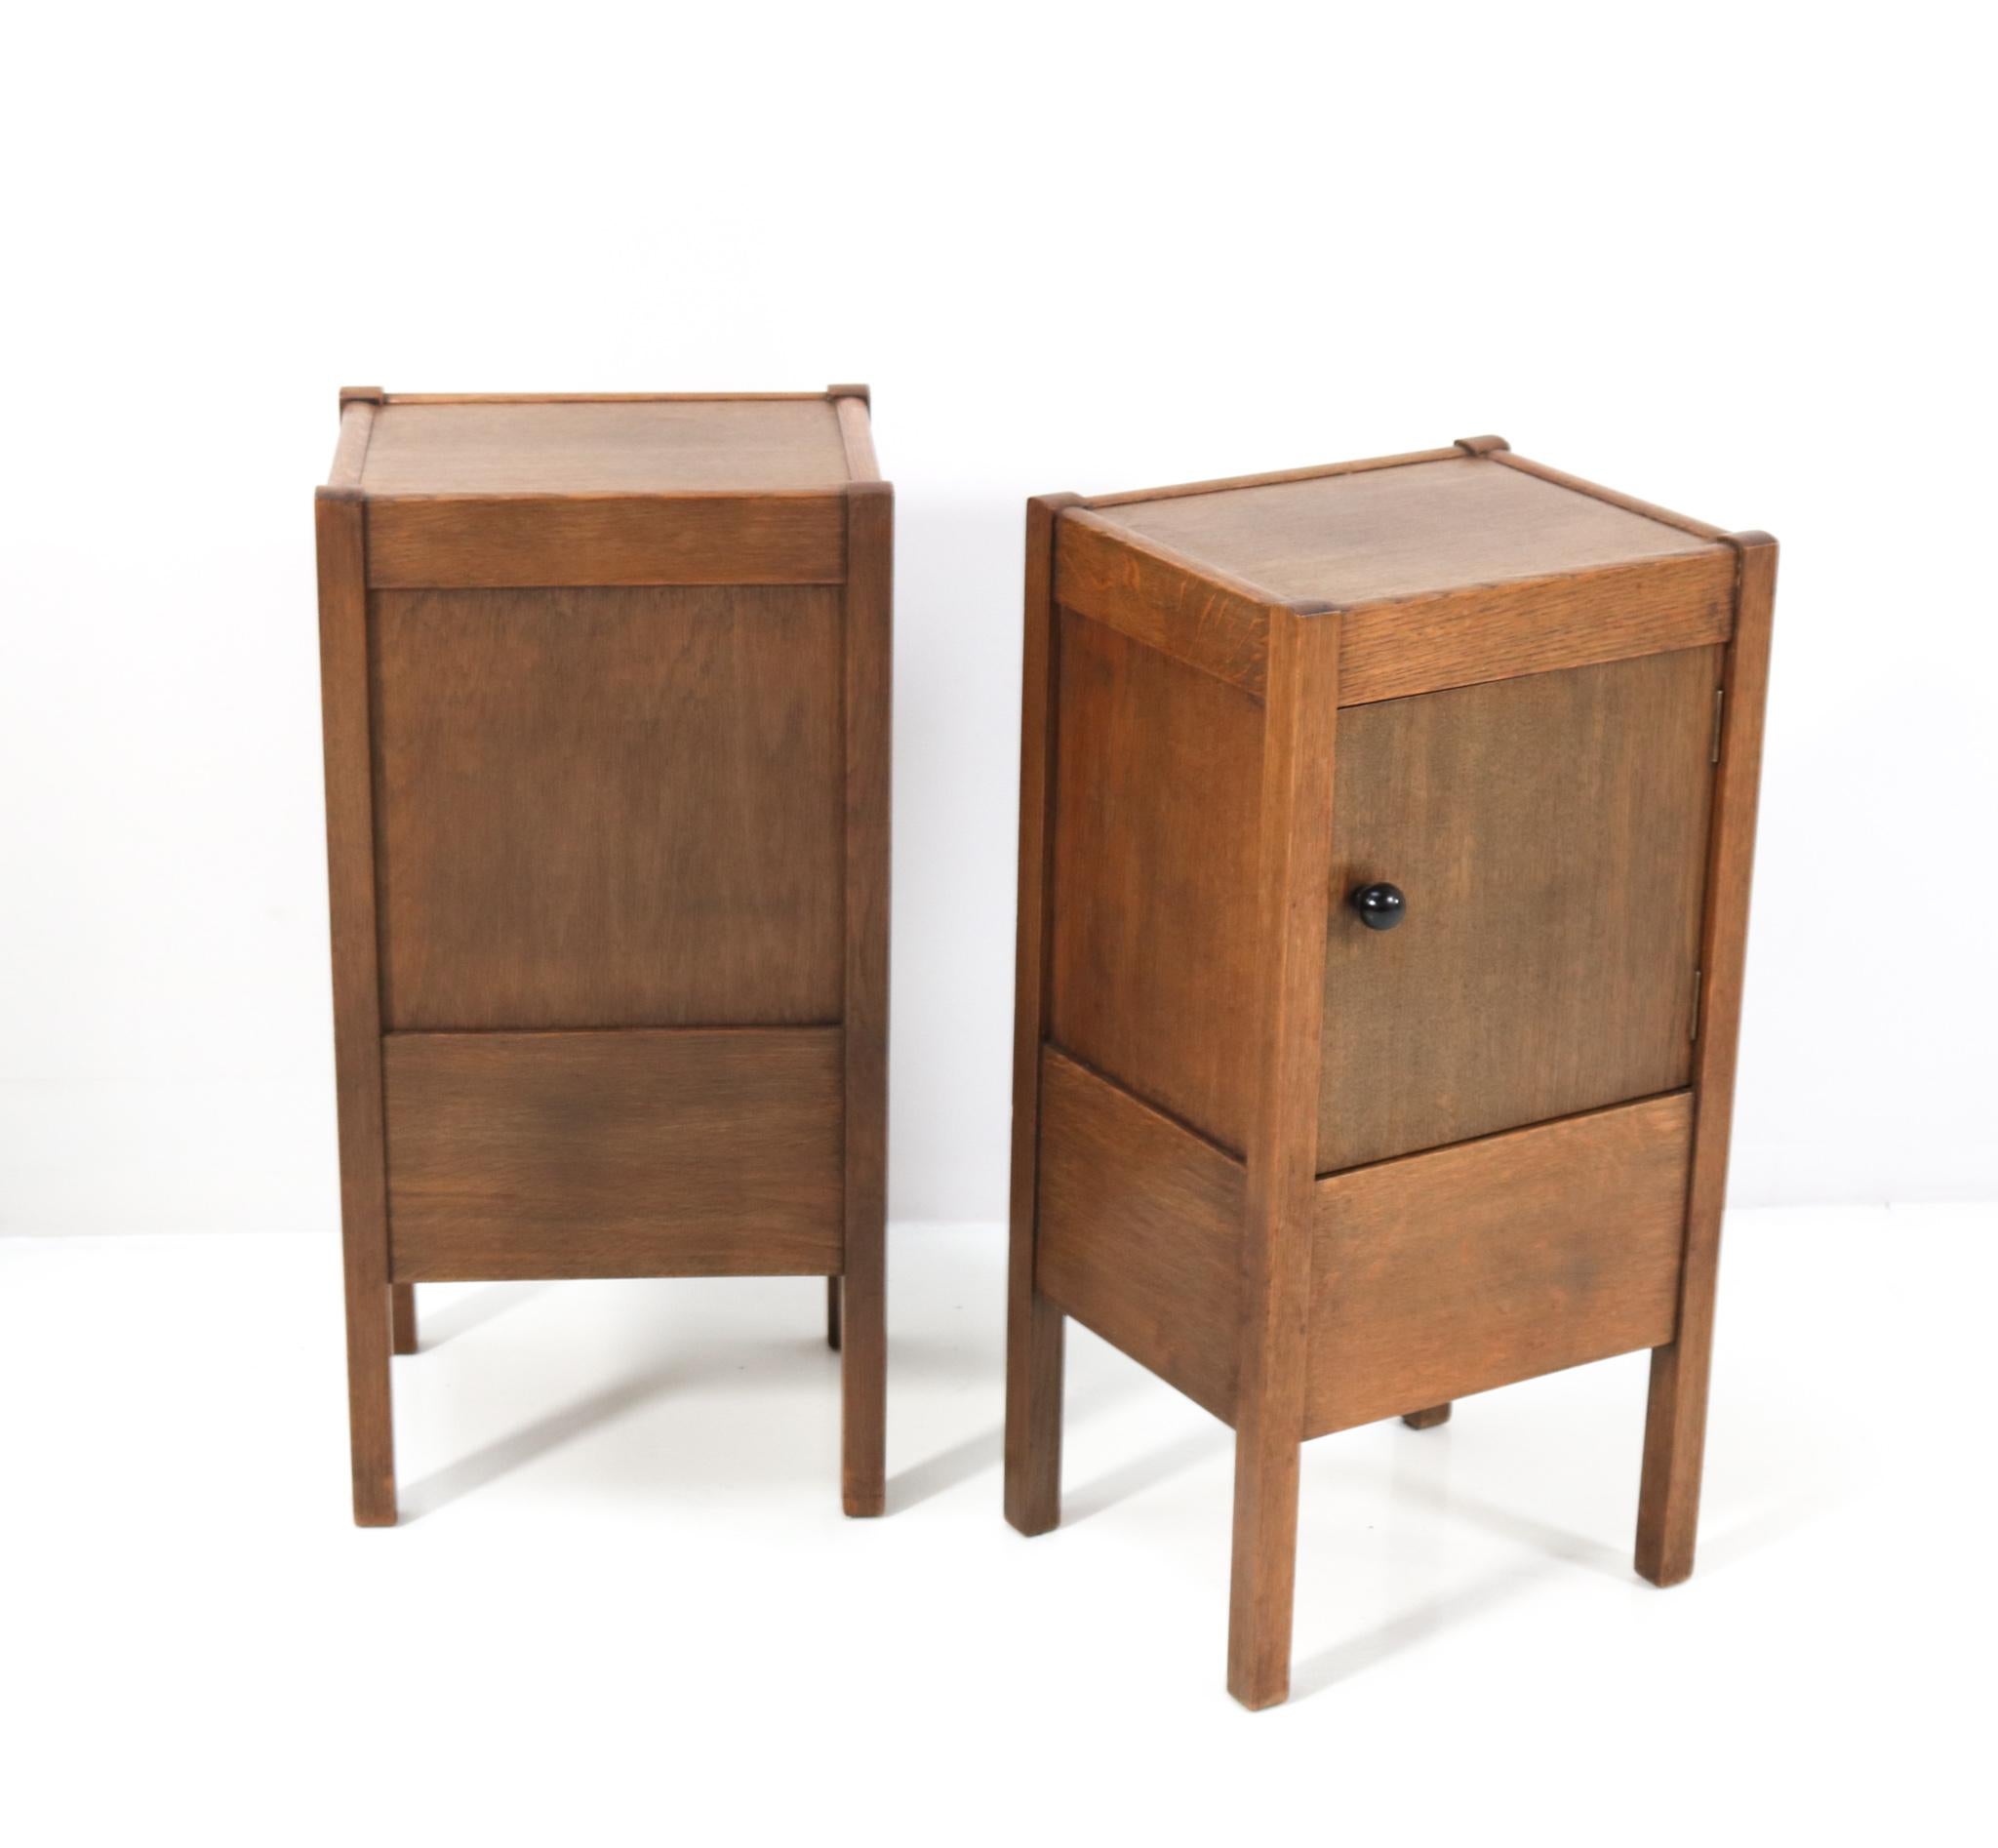 Two Oak Art Deco Nightstands by J.A. Muntendam for L.O.V. Oosterbeek, 1920s 1